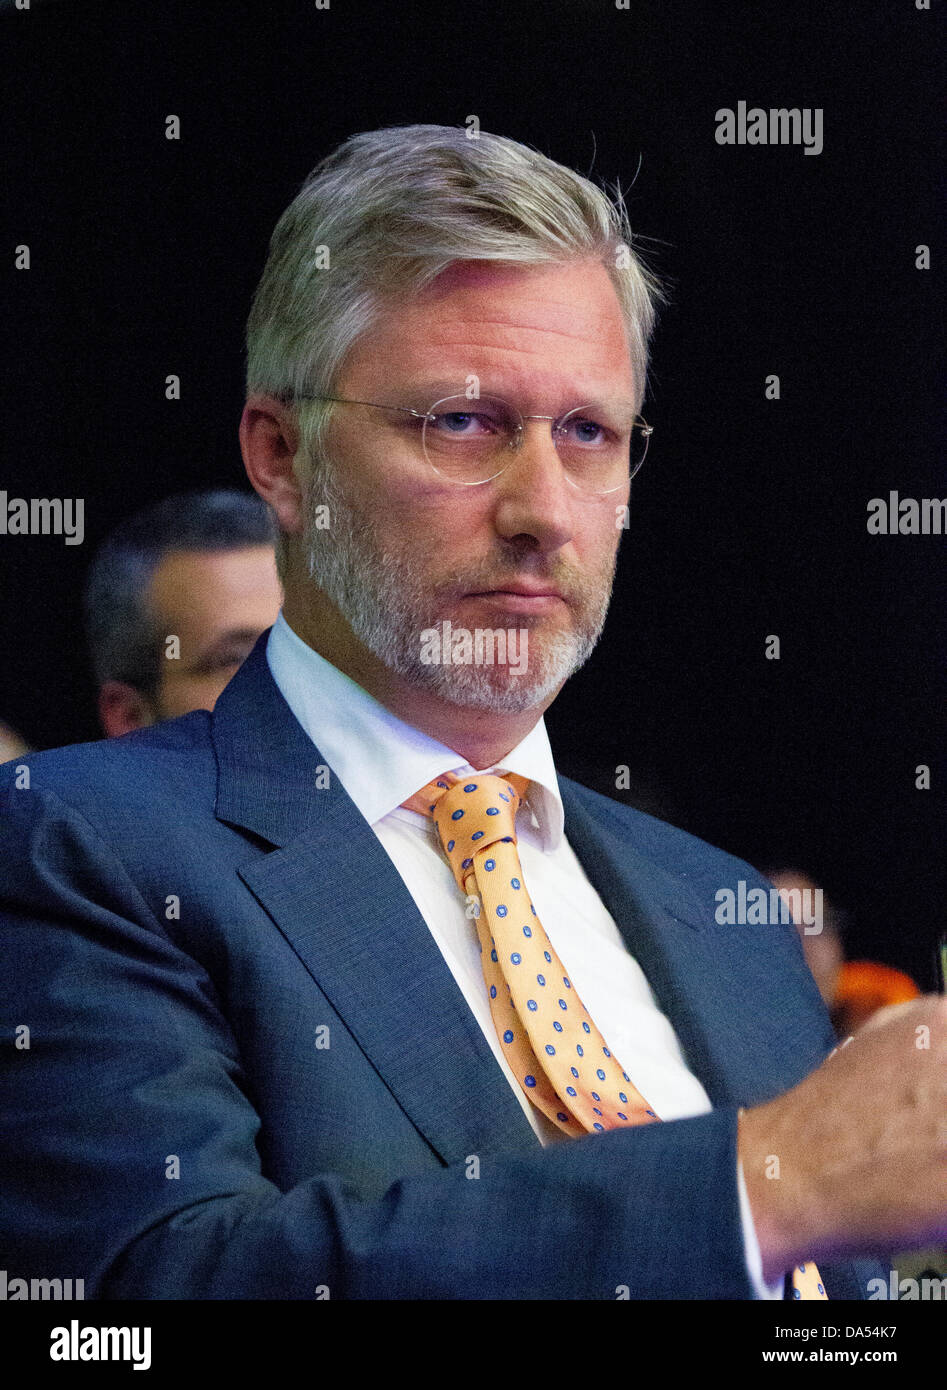 Prince Philippe of Belgium, Duke of Brabant, who will now become king on the abdication of his father, King Albert II. Stock Photo